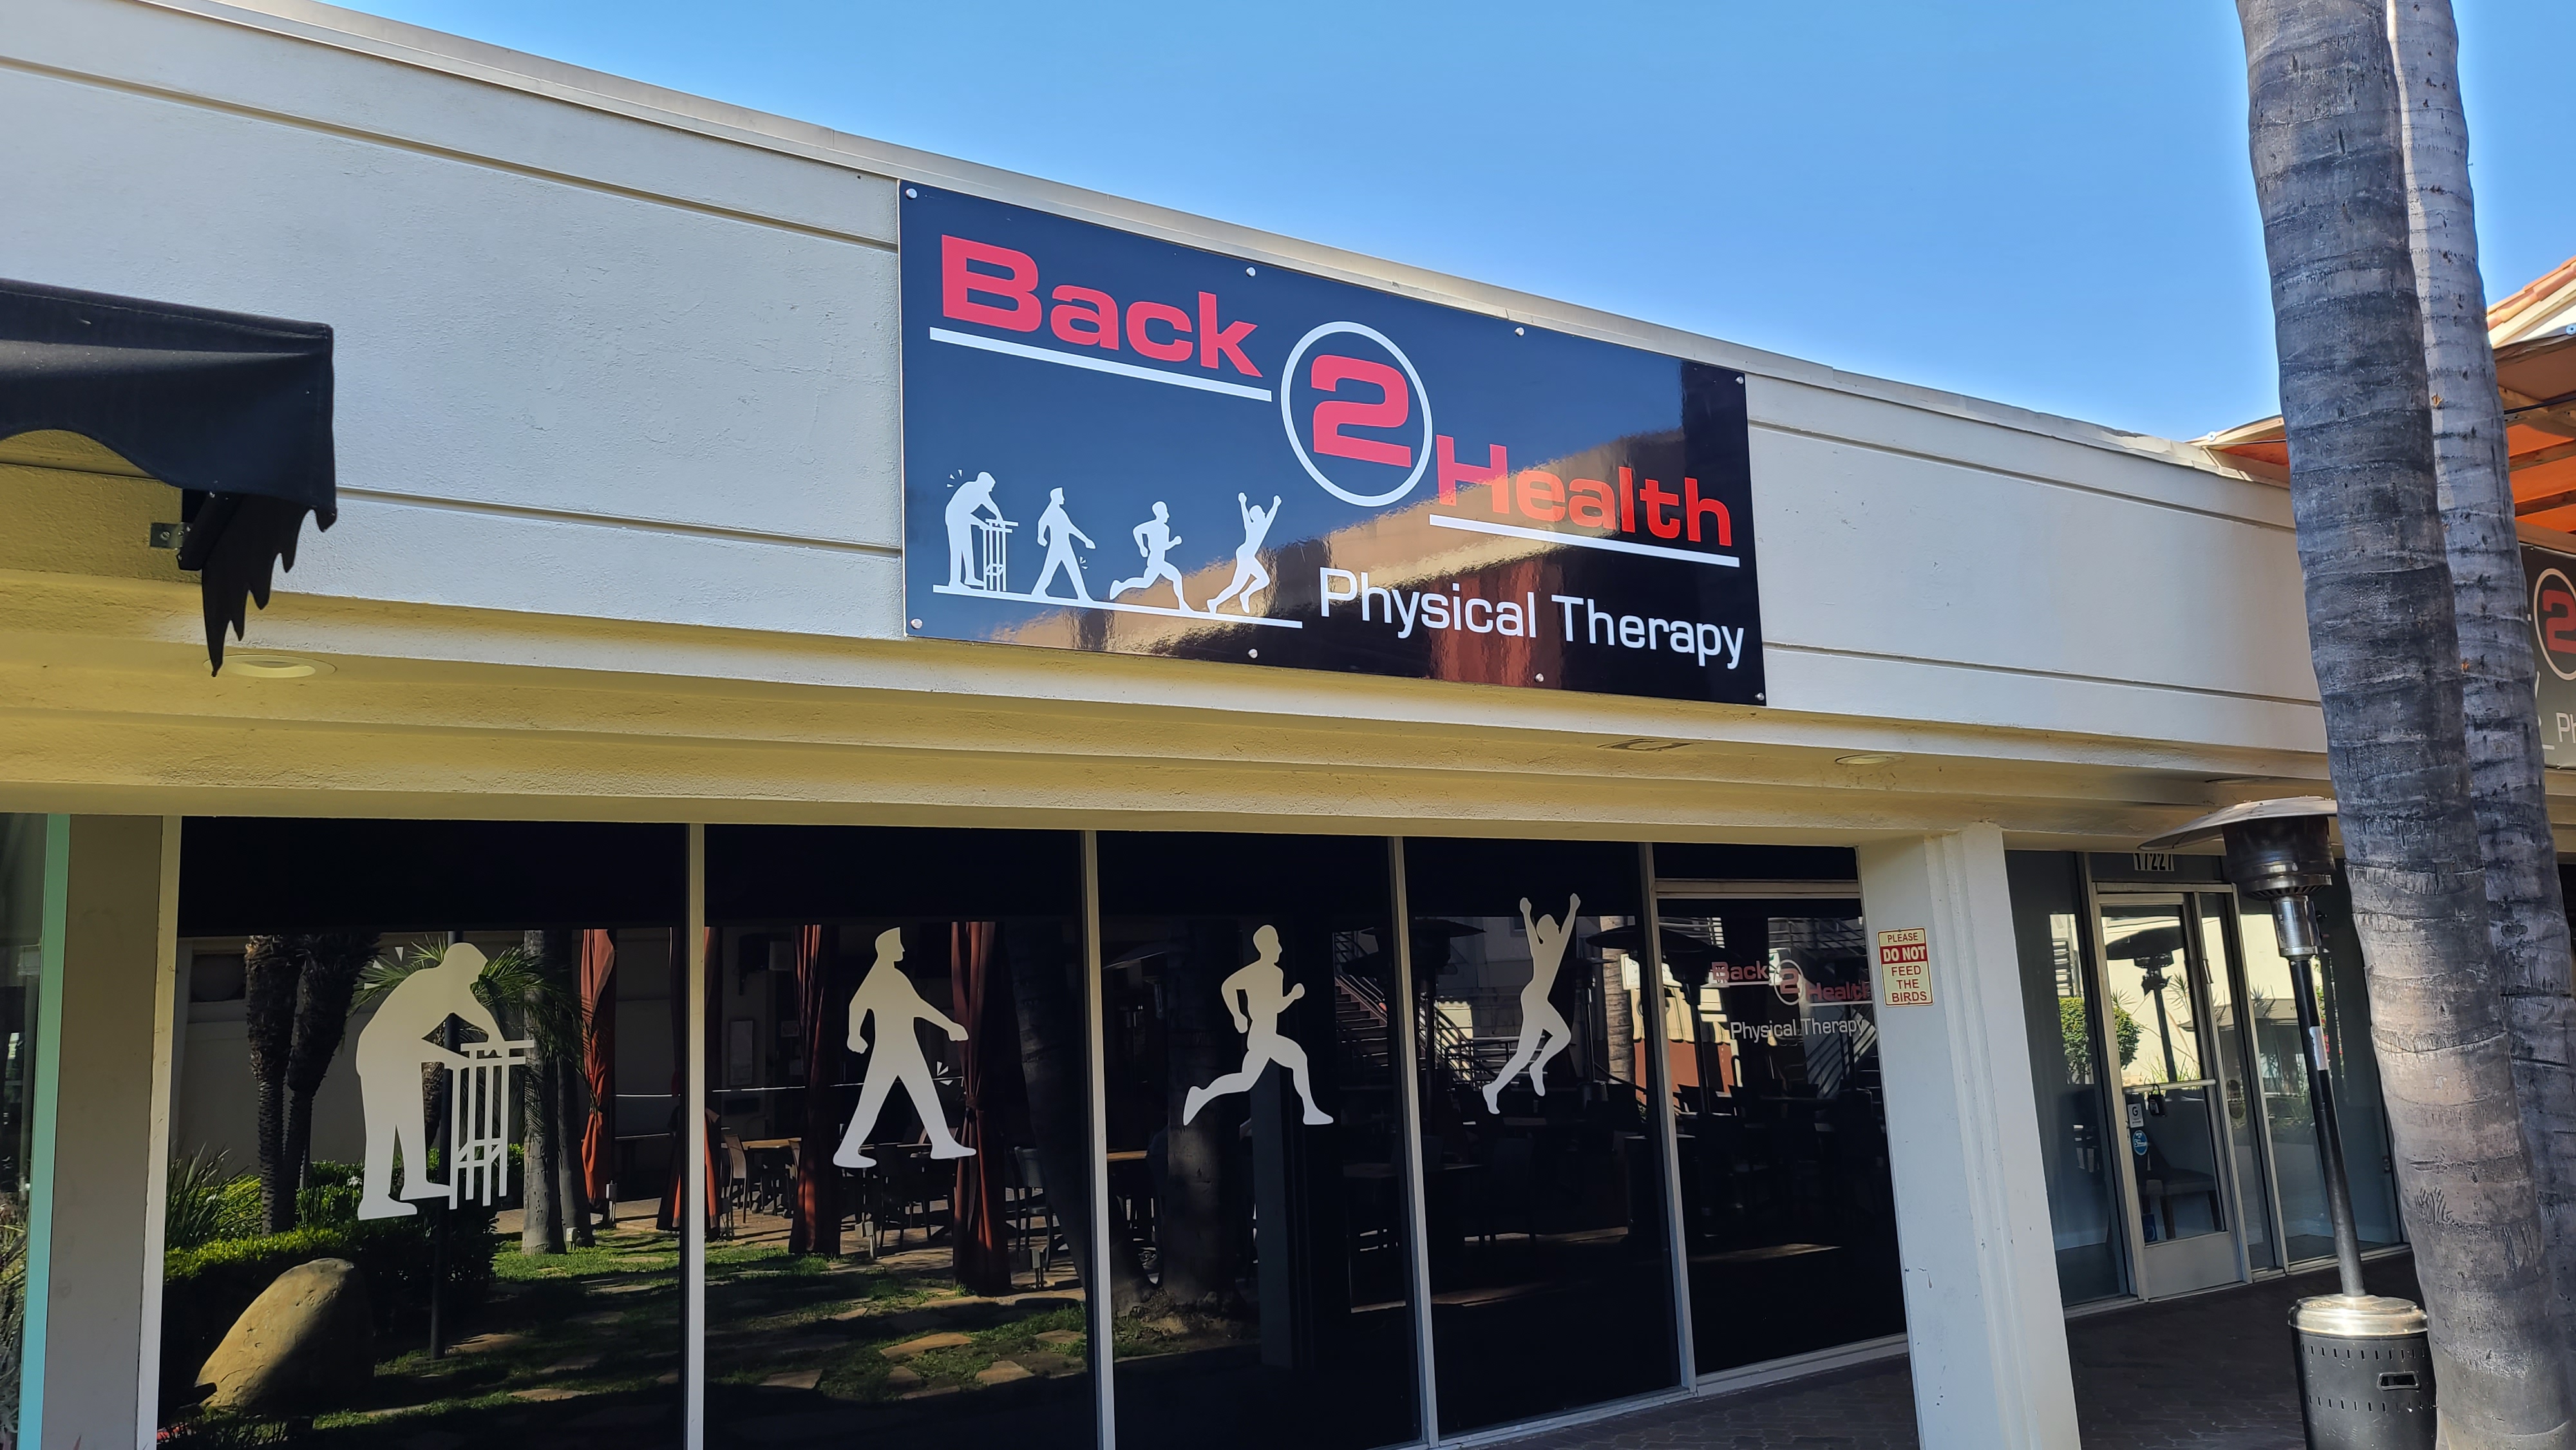 These custom outdoor signs we fabricated and installed for Back 2 Health in Encino will make them stand out from the rest and draw customers in.